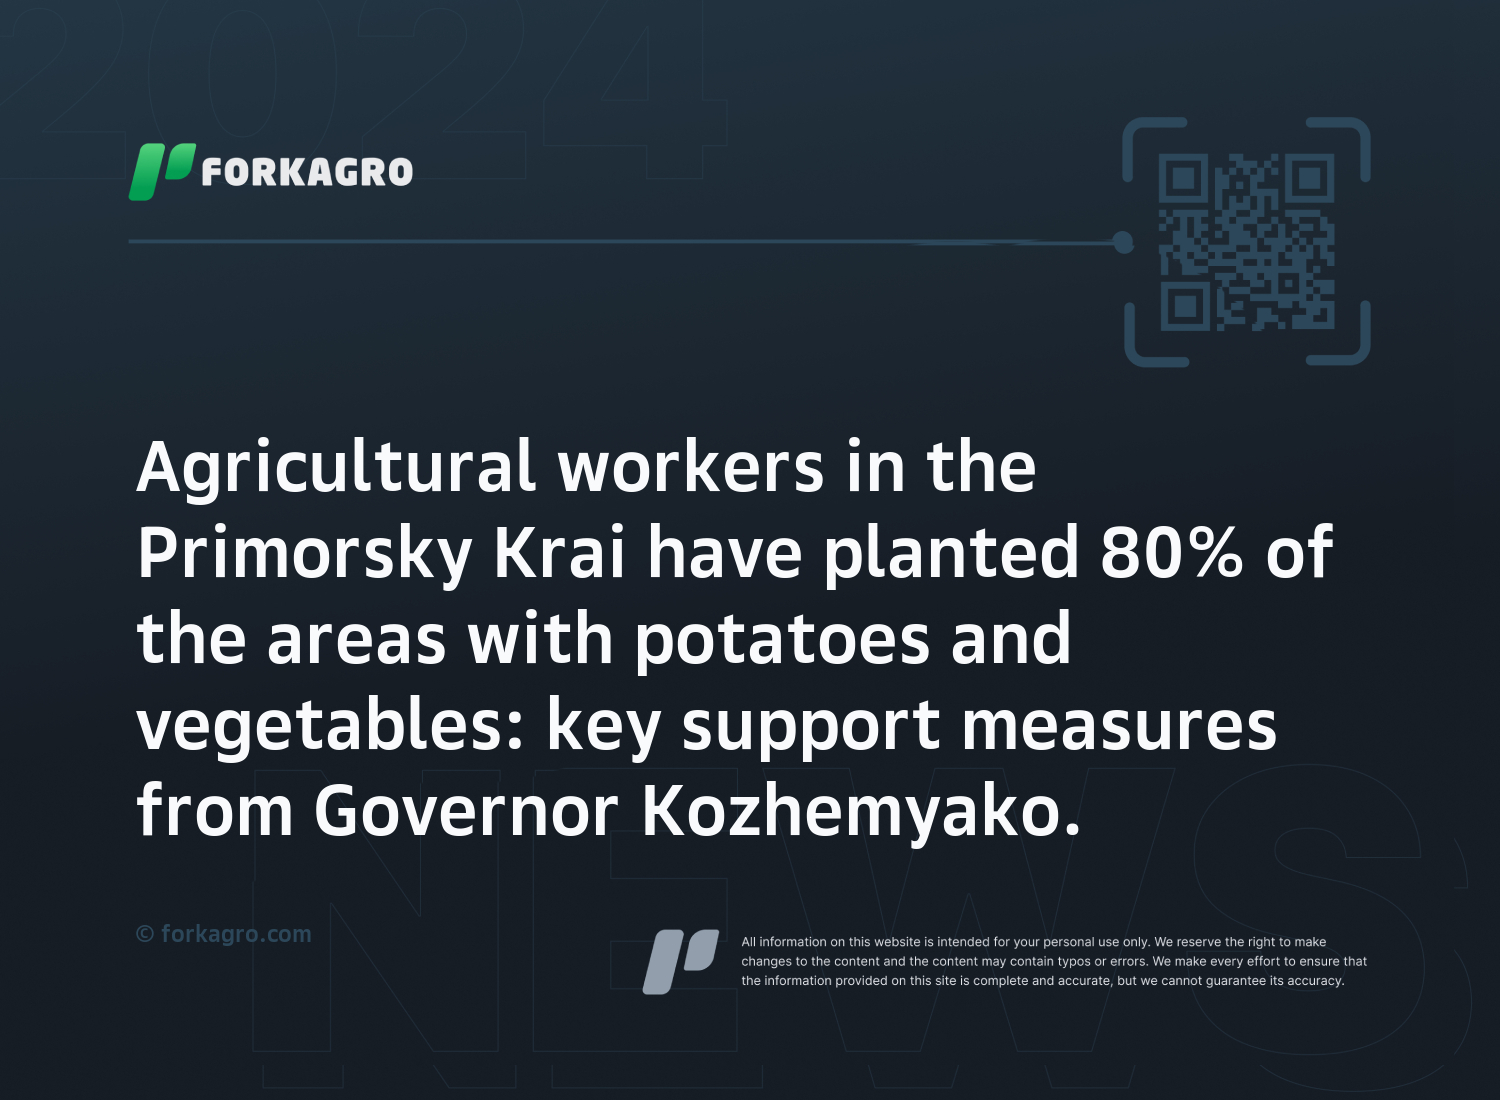 Agricultural workers in the Primorsky Krai have planted 80% of the areas with potatoes and vegetables: key support measures from Governor Kozhemyako.